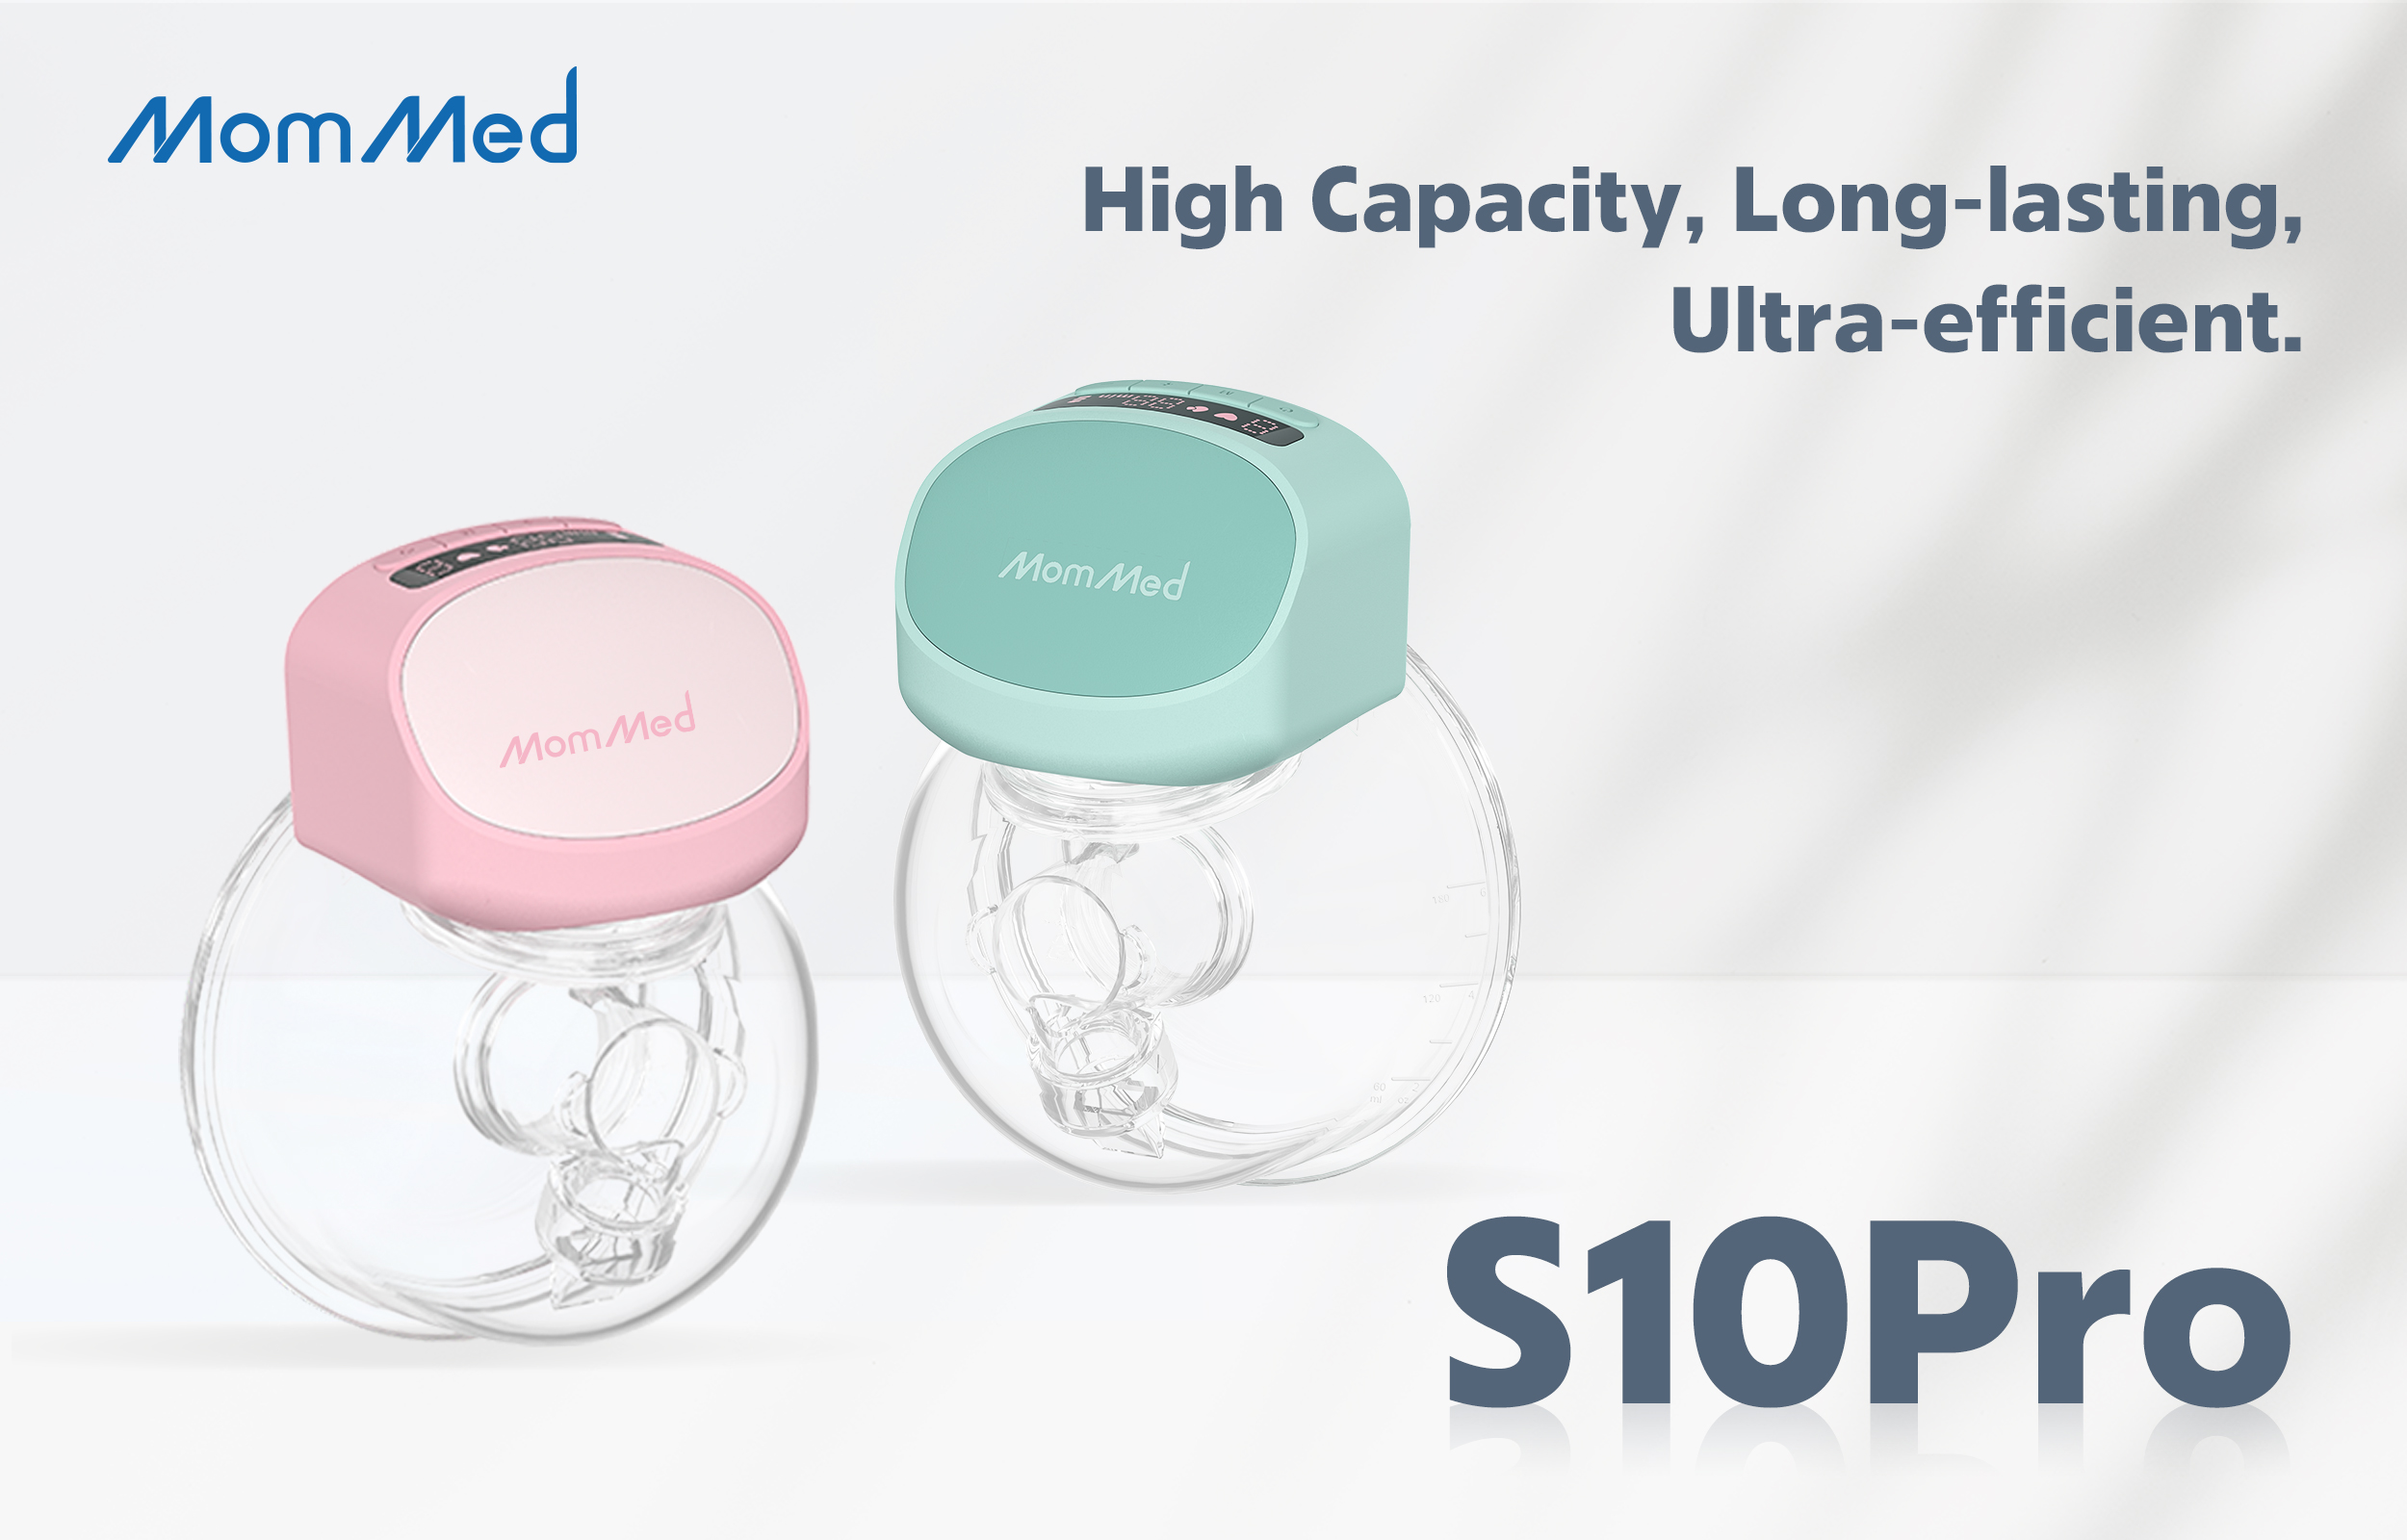 MomMed S10 Pro Breast Pump, High Capacity, Long-lasting, Ultra-efficient.